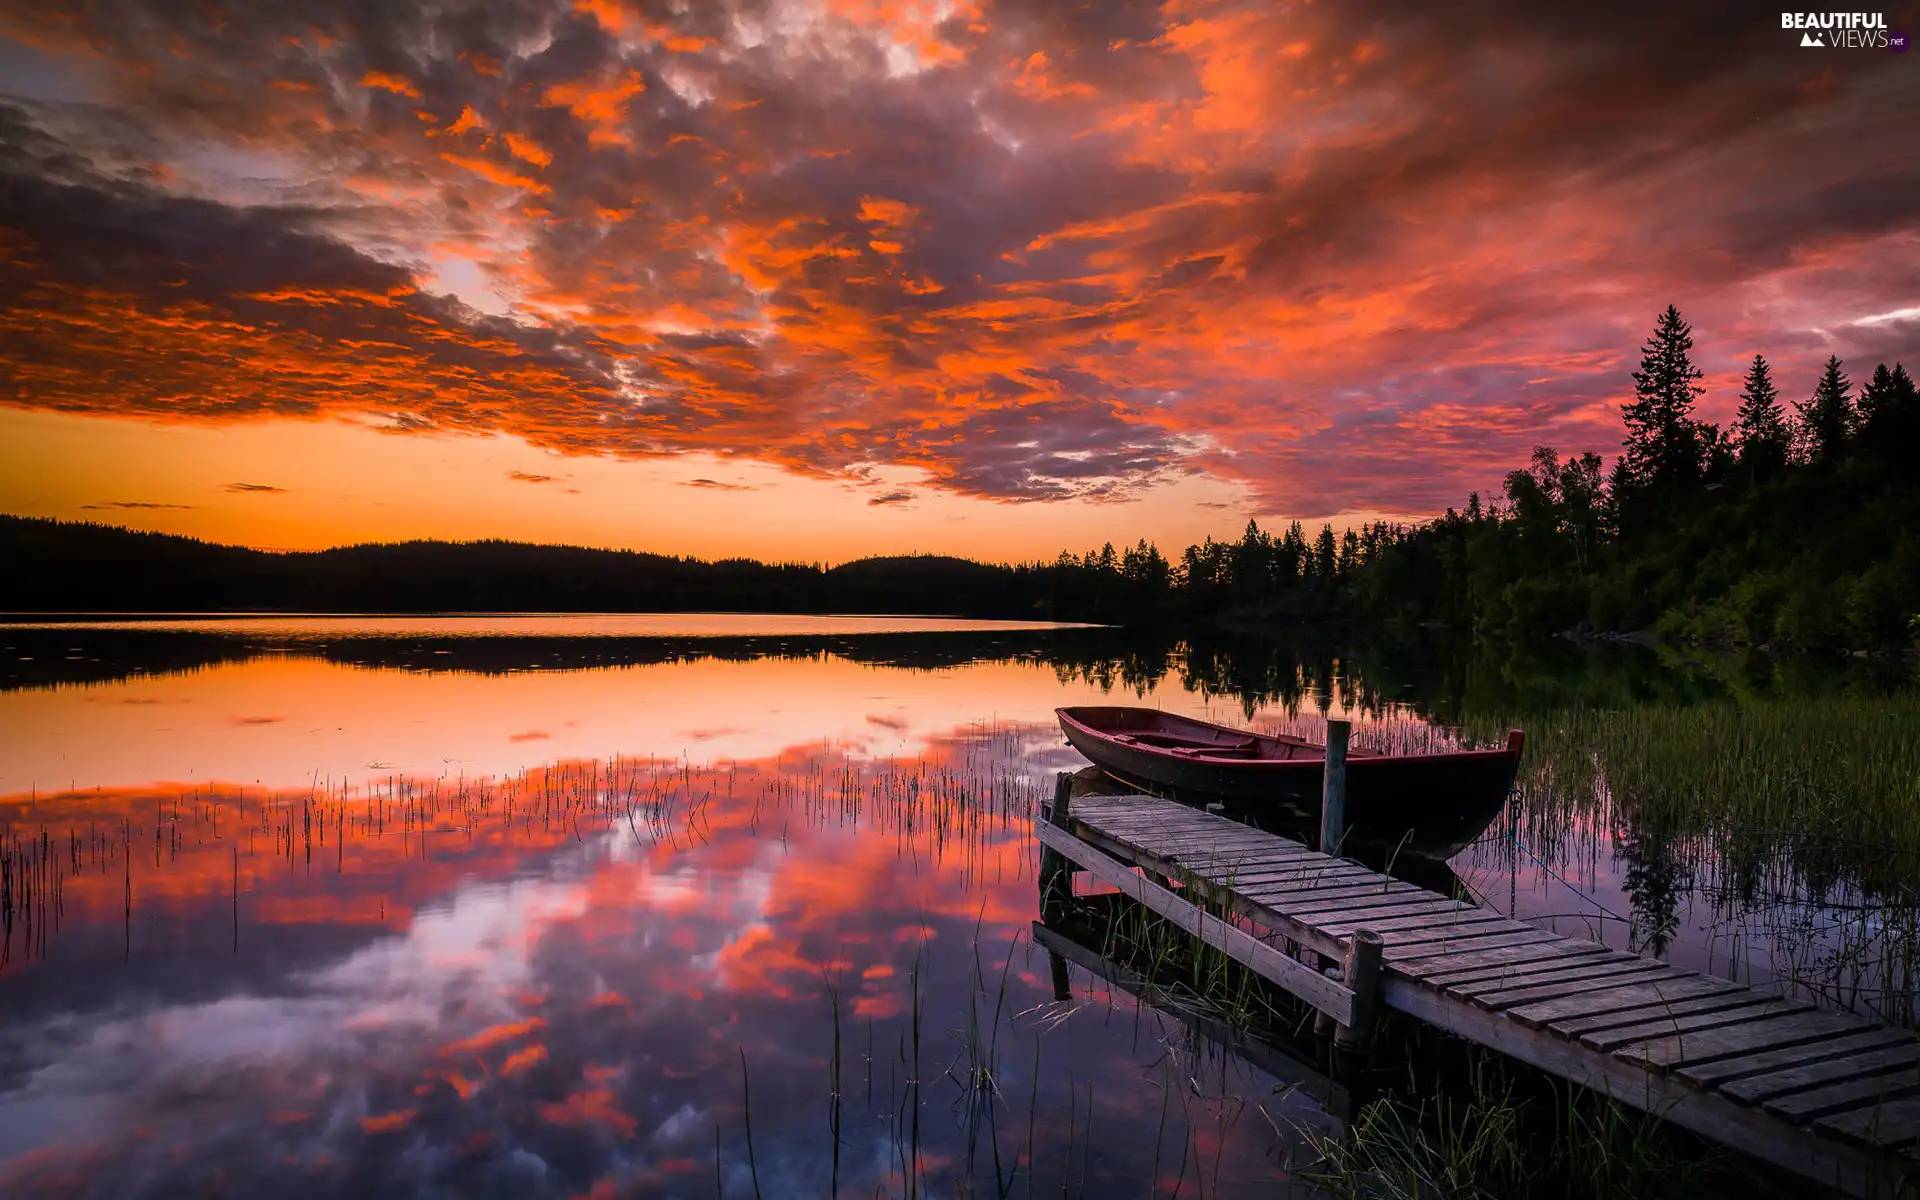 Boat, lake, clouds, Trondheim City, reflection, trees, Sor Trondelag Region, forest, lake, Norway, Platform, viewes, Great Sunsets